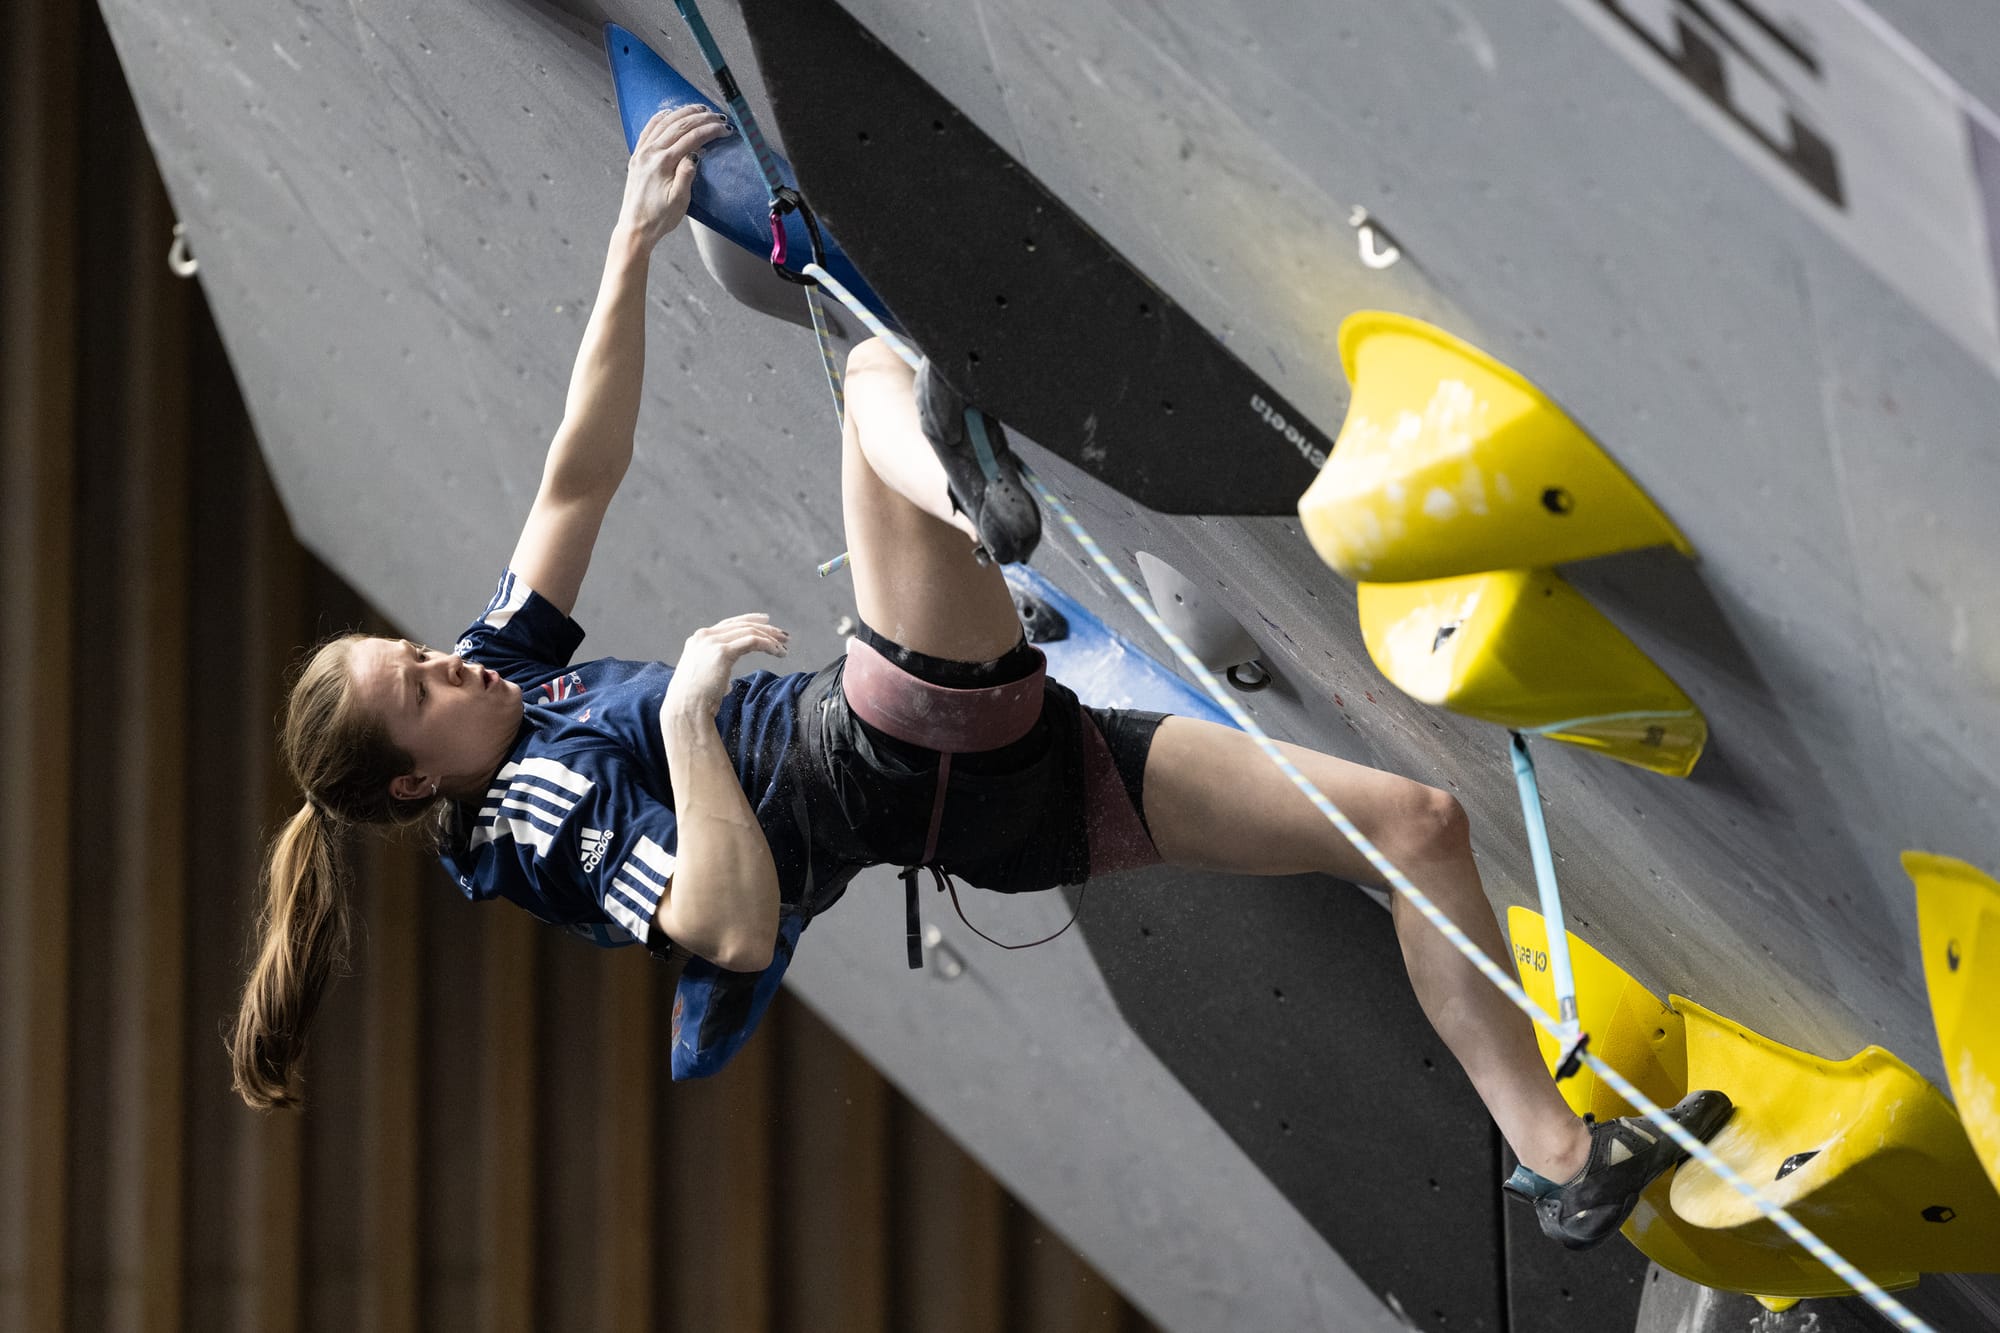 Erin McNeice on the semi-final Lead route in Wujiang